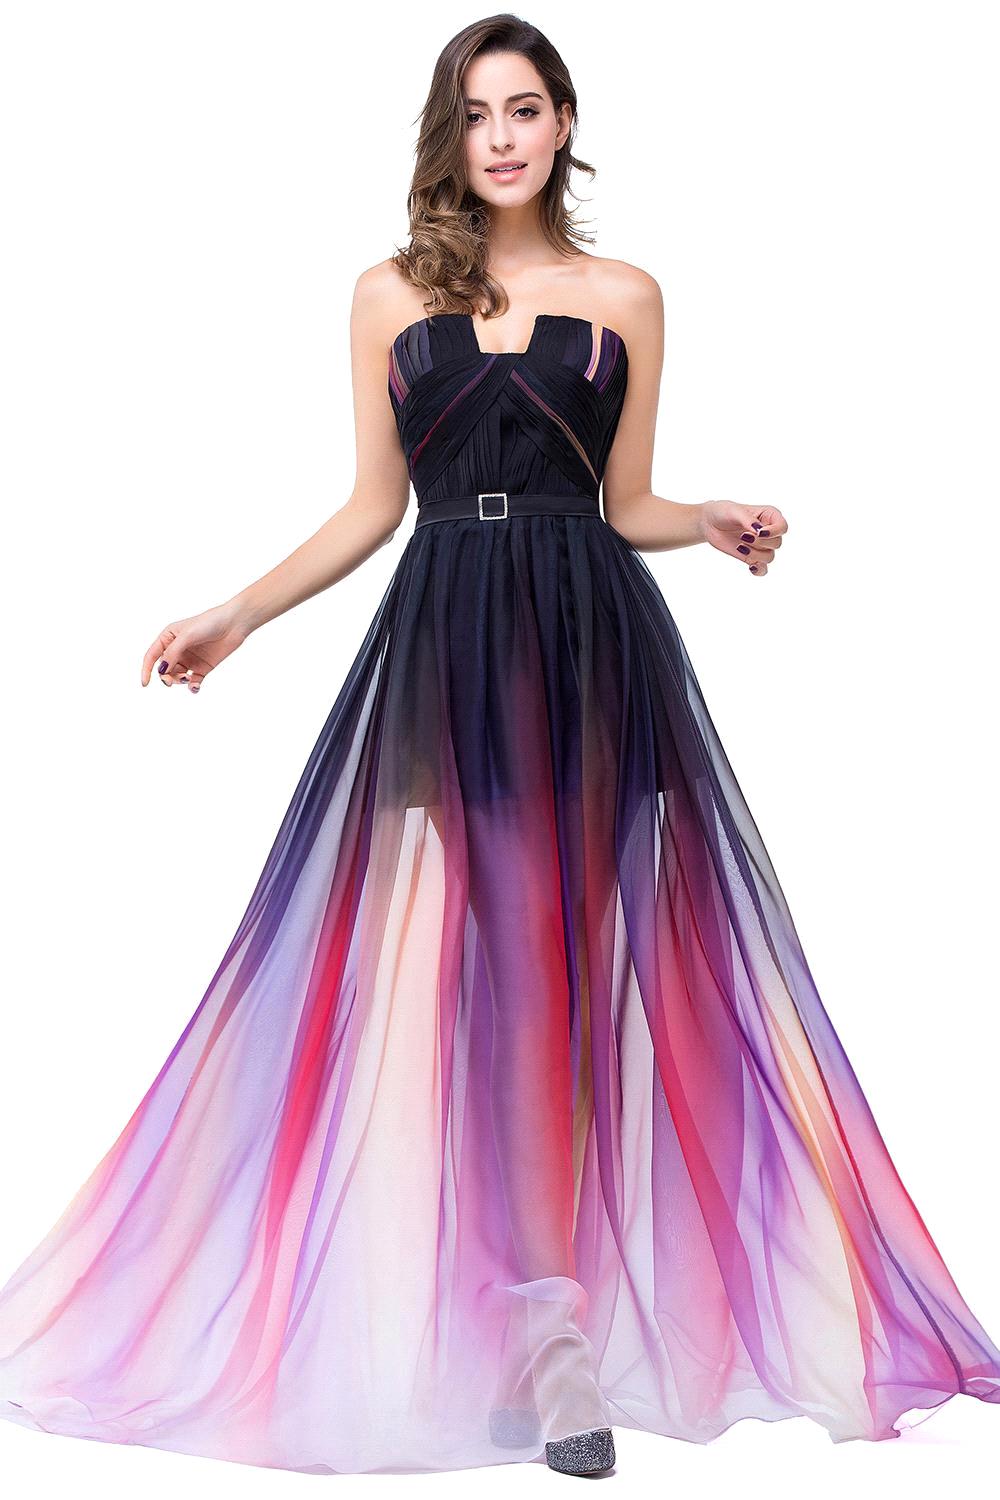 Pink and black ombre prom dresses